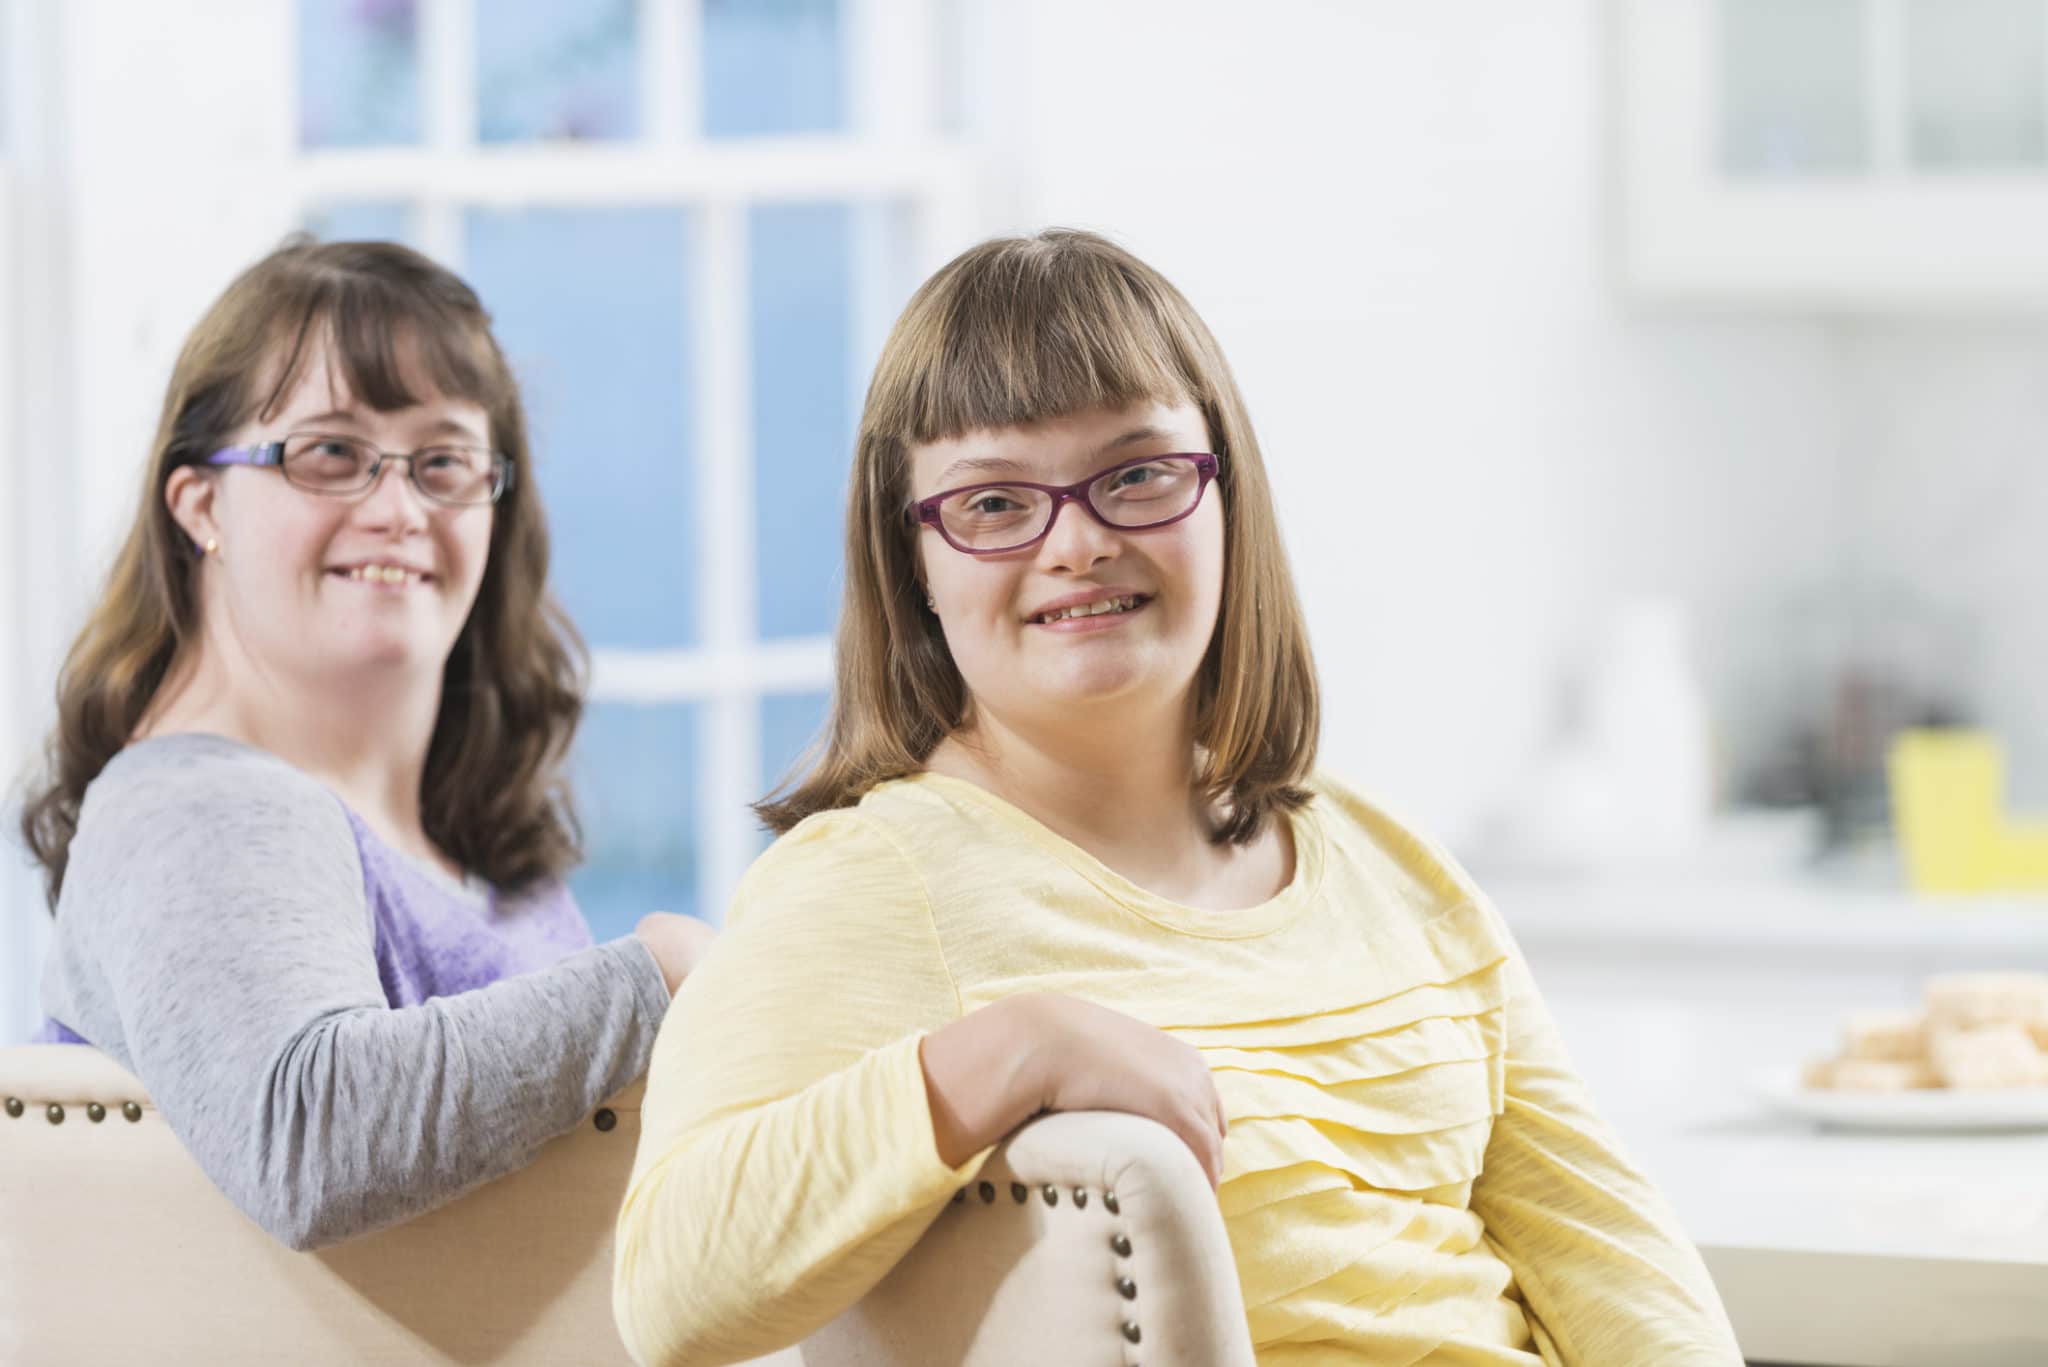 Two sisters with down syndrome sitting on chairs at home at the kitchen counter. The focus is on the younger girl, a teenager, wearing a yellow shirt.